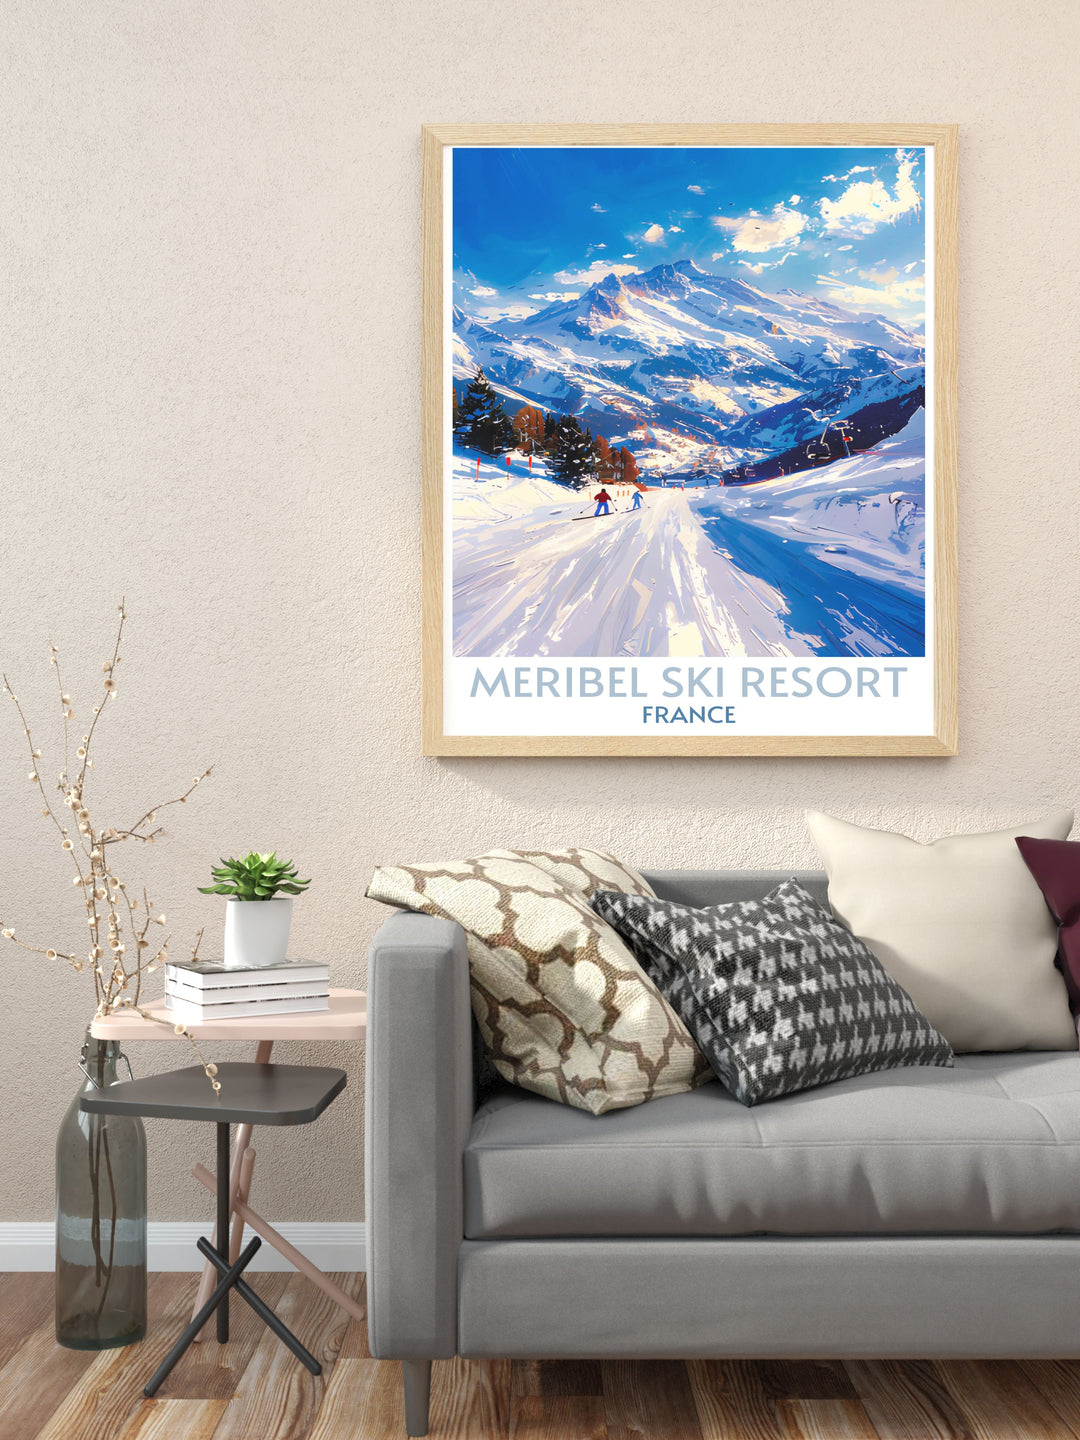 Wall art featuring panoramic views of the French Alps from Meribel, highlighting the natural beauty and vast ski terrain.